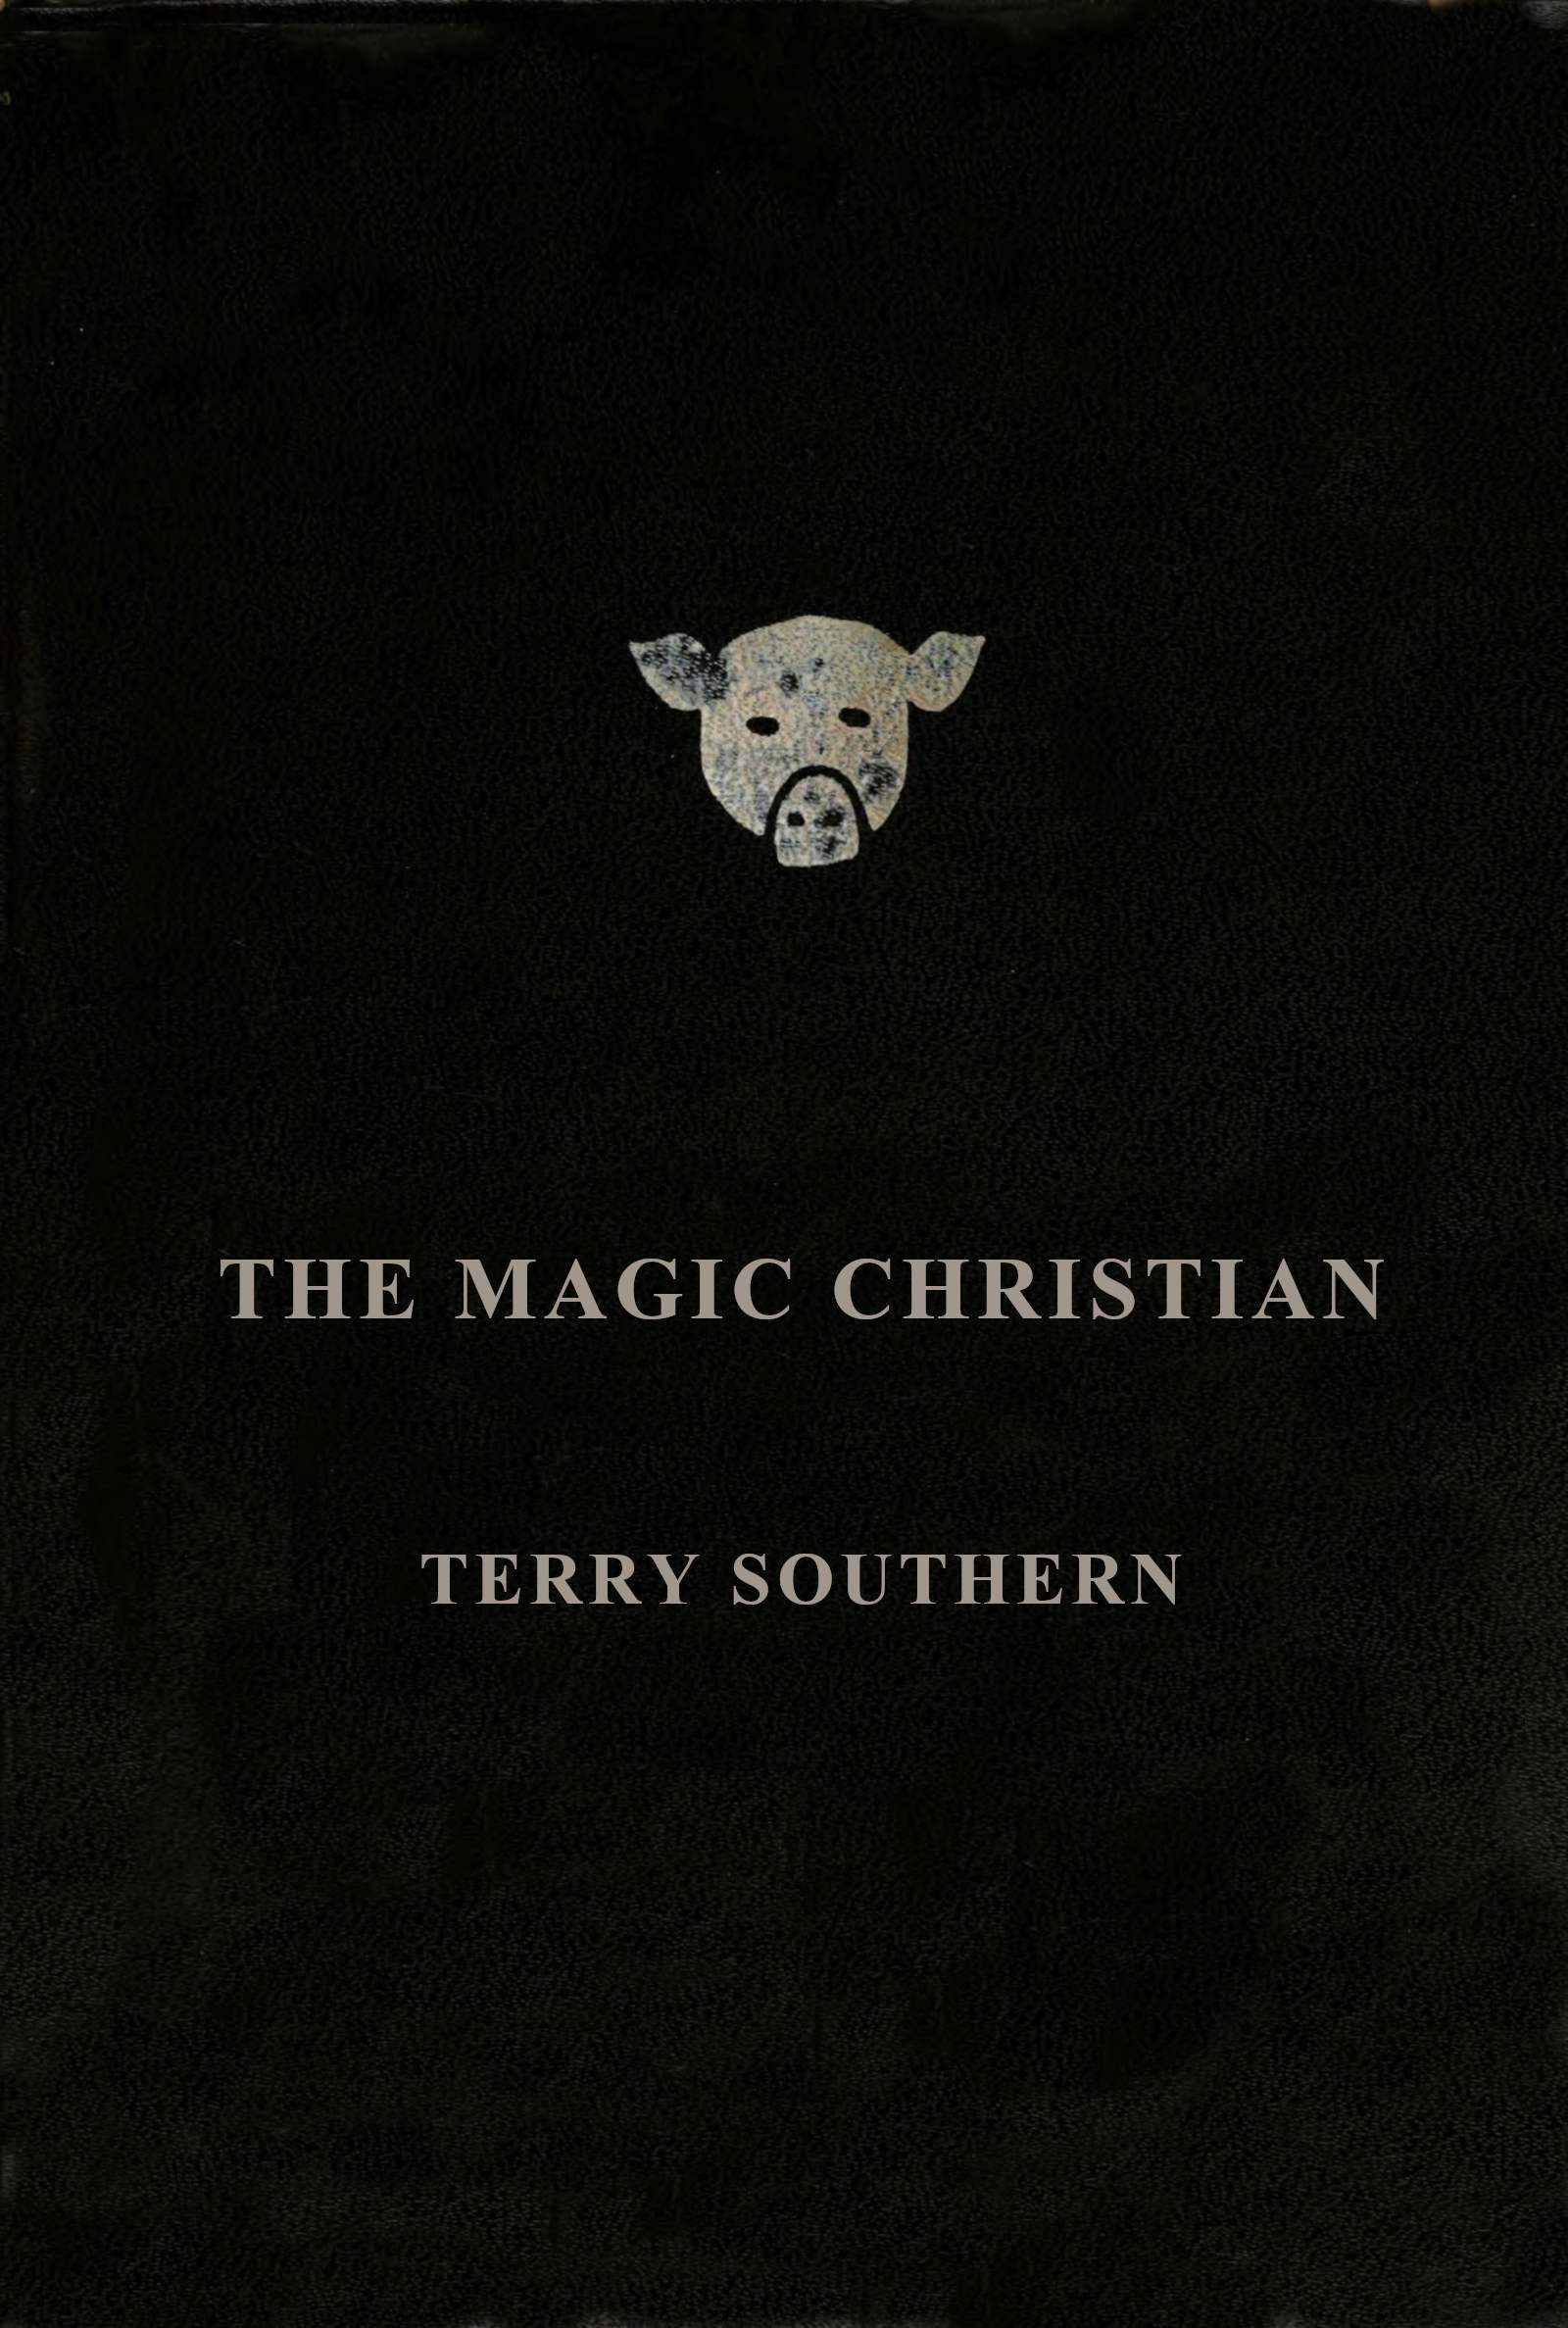 Sleeping Fat Hairy Sluts - The Magic Christian, by Terry Southernâ€”A Project Gutenberg eBook